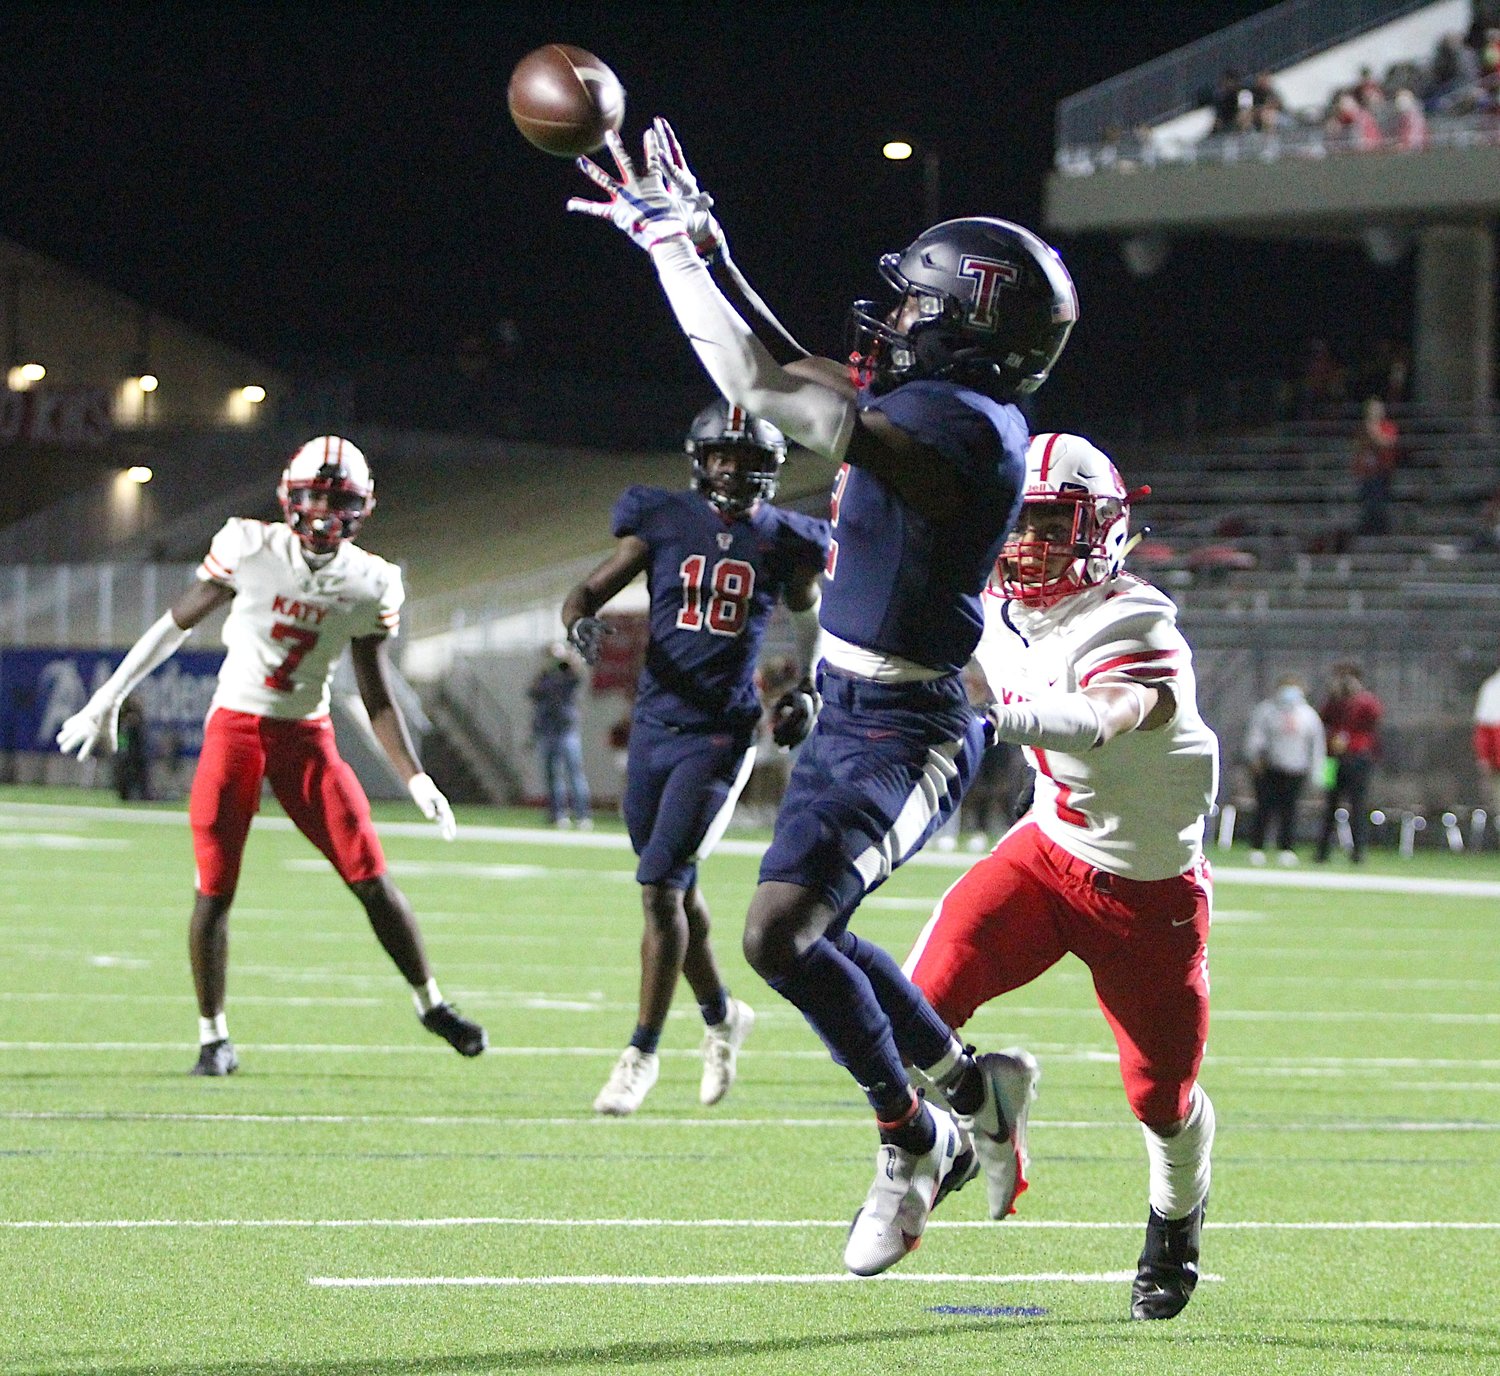 Tompkins receiver Joshua McMillan II leaps to haul in his first touchdown of the game during the Falcons' 24-19 win over Katy at Legacy Stadium.